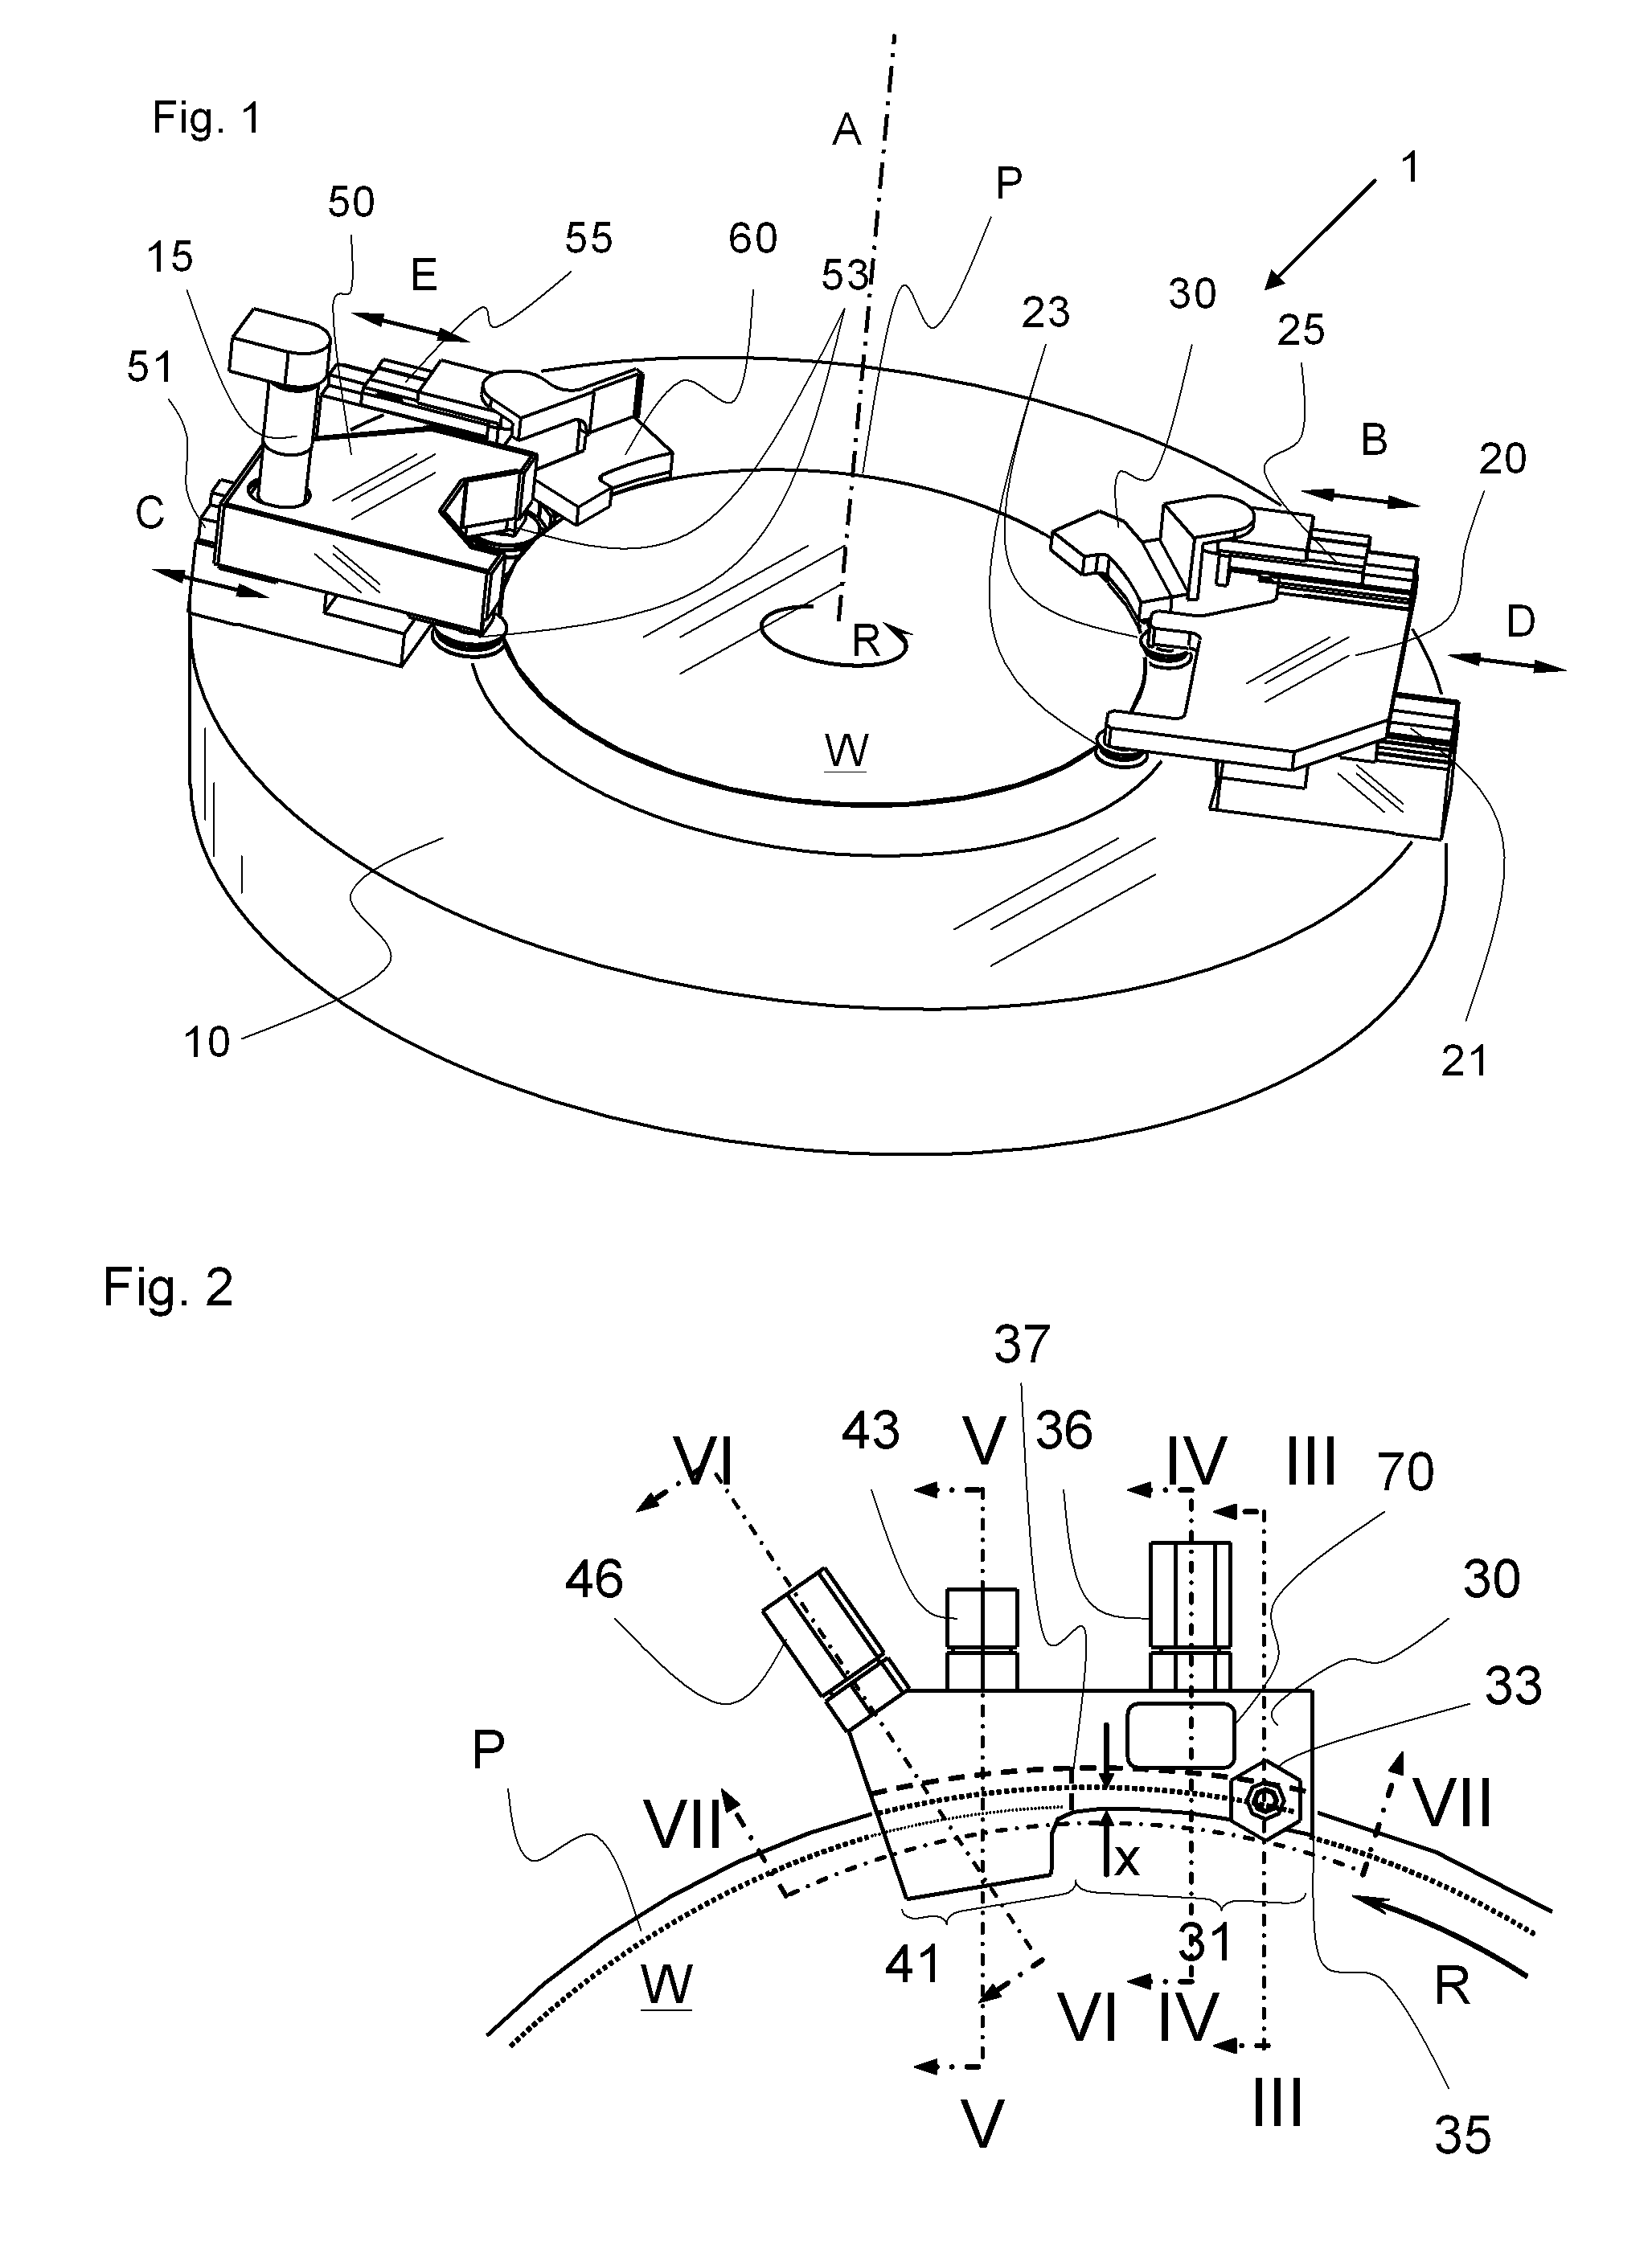 Device and process for wet treating a peripheral area of a wafer-shaped article